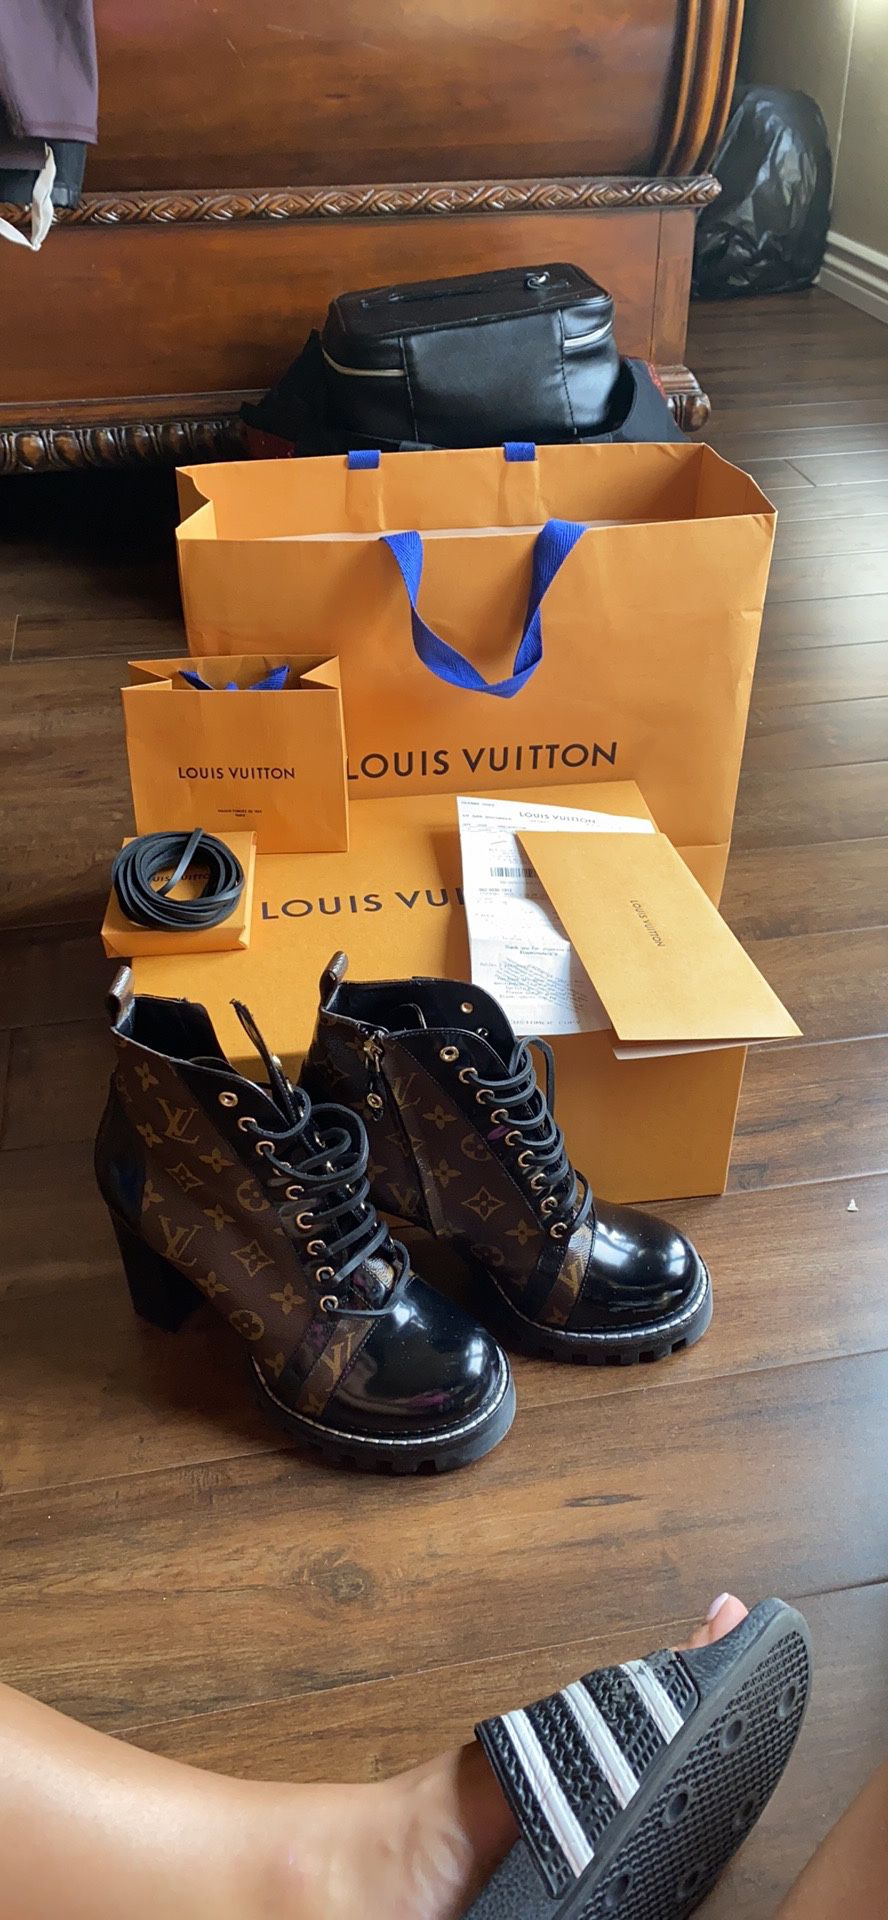 louis vuitton star trail boots to wear with shorts｜TikTok Search